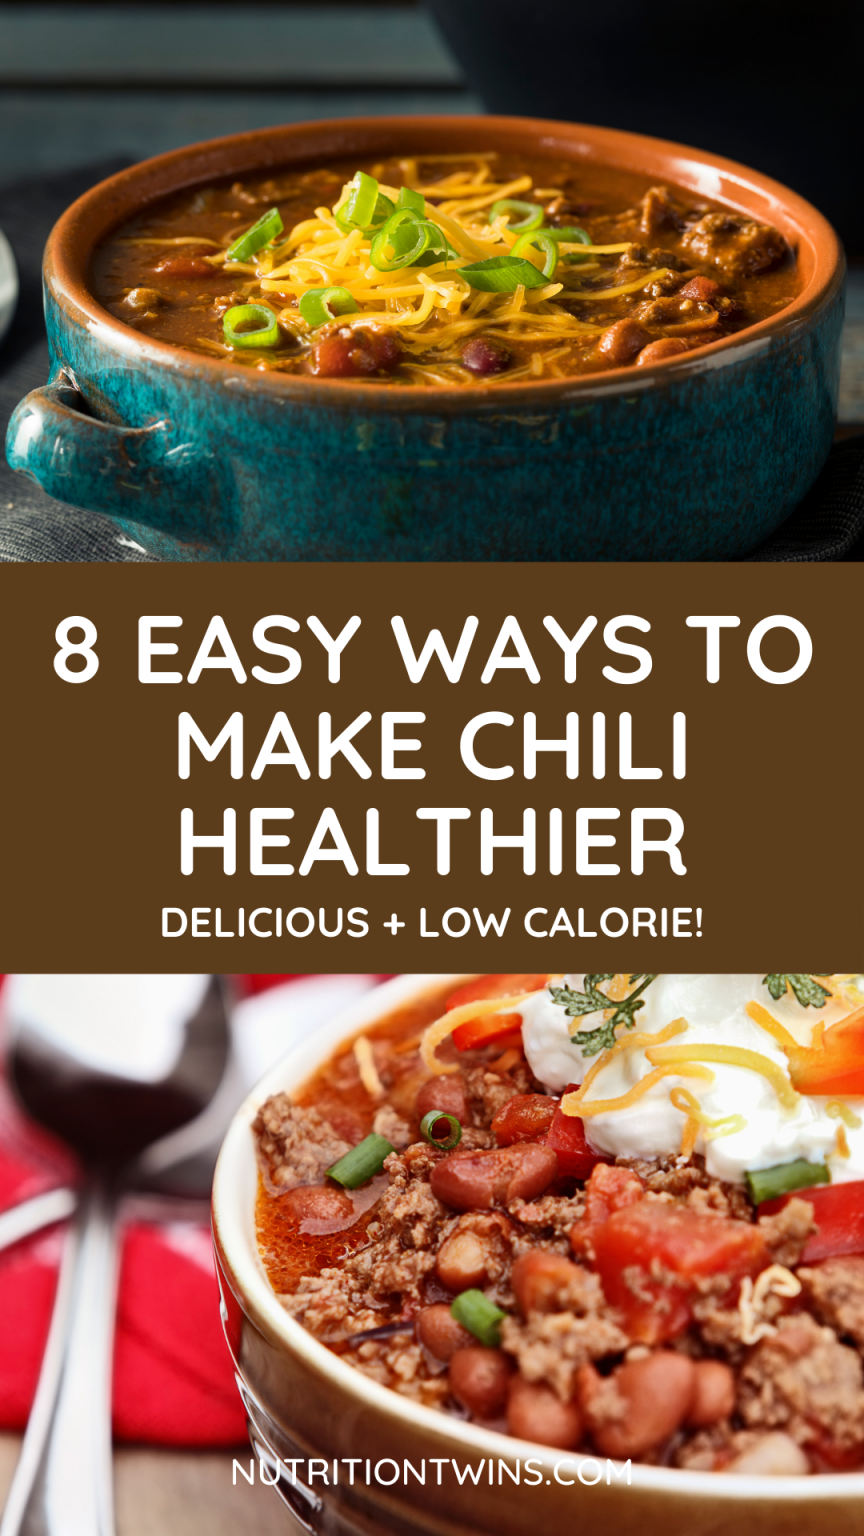 8 Easy Ways to Make Chili Healthier - Nutrition Twins